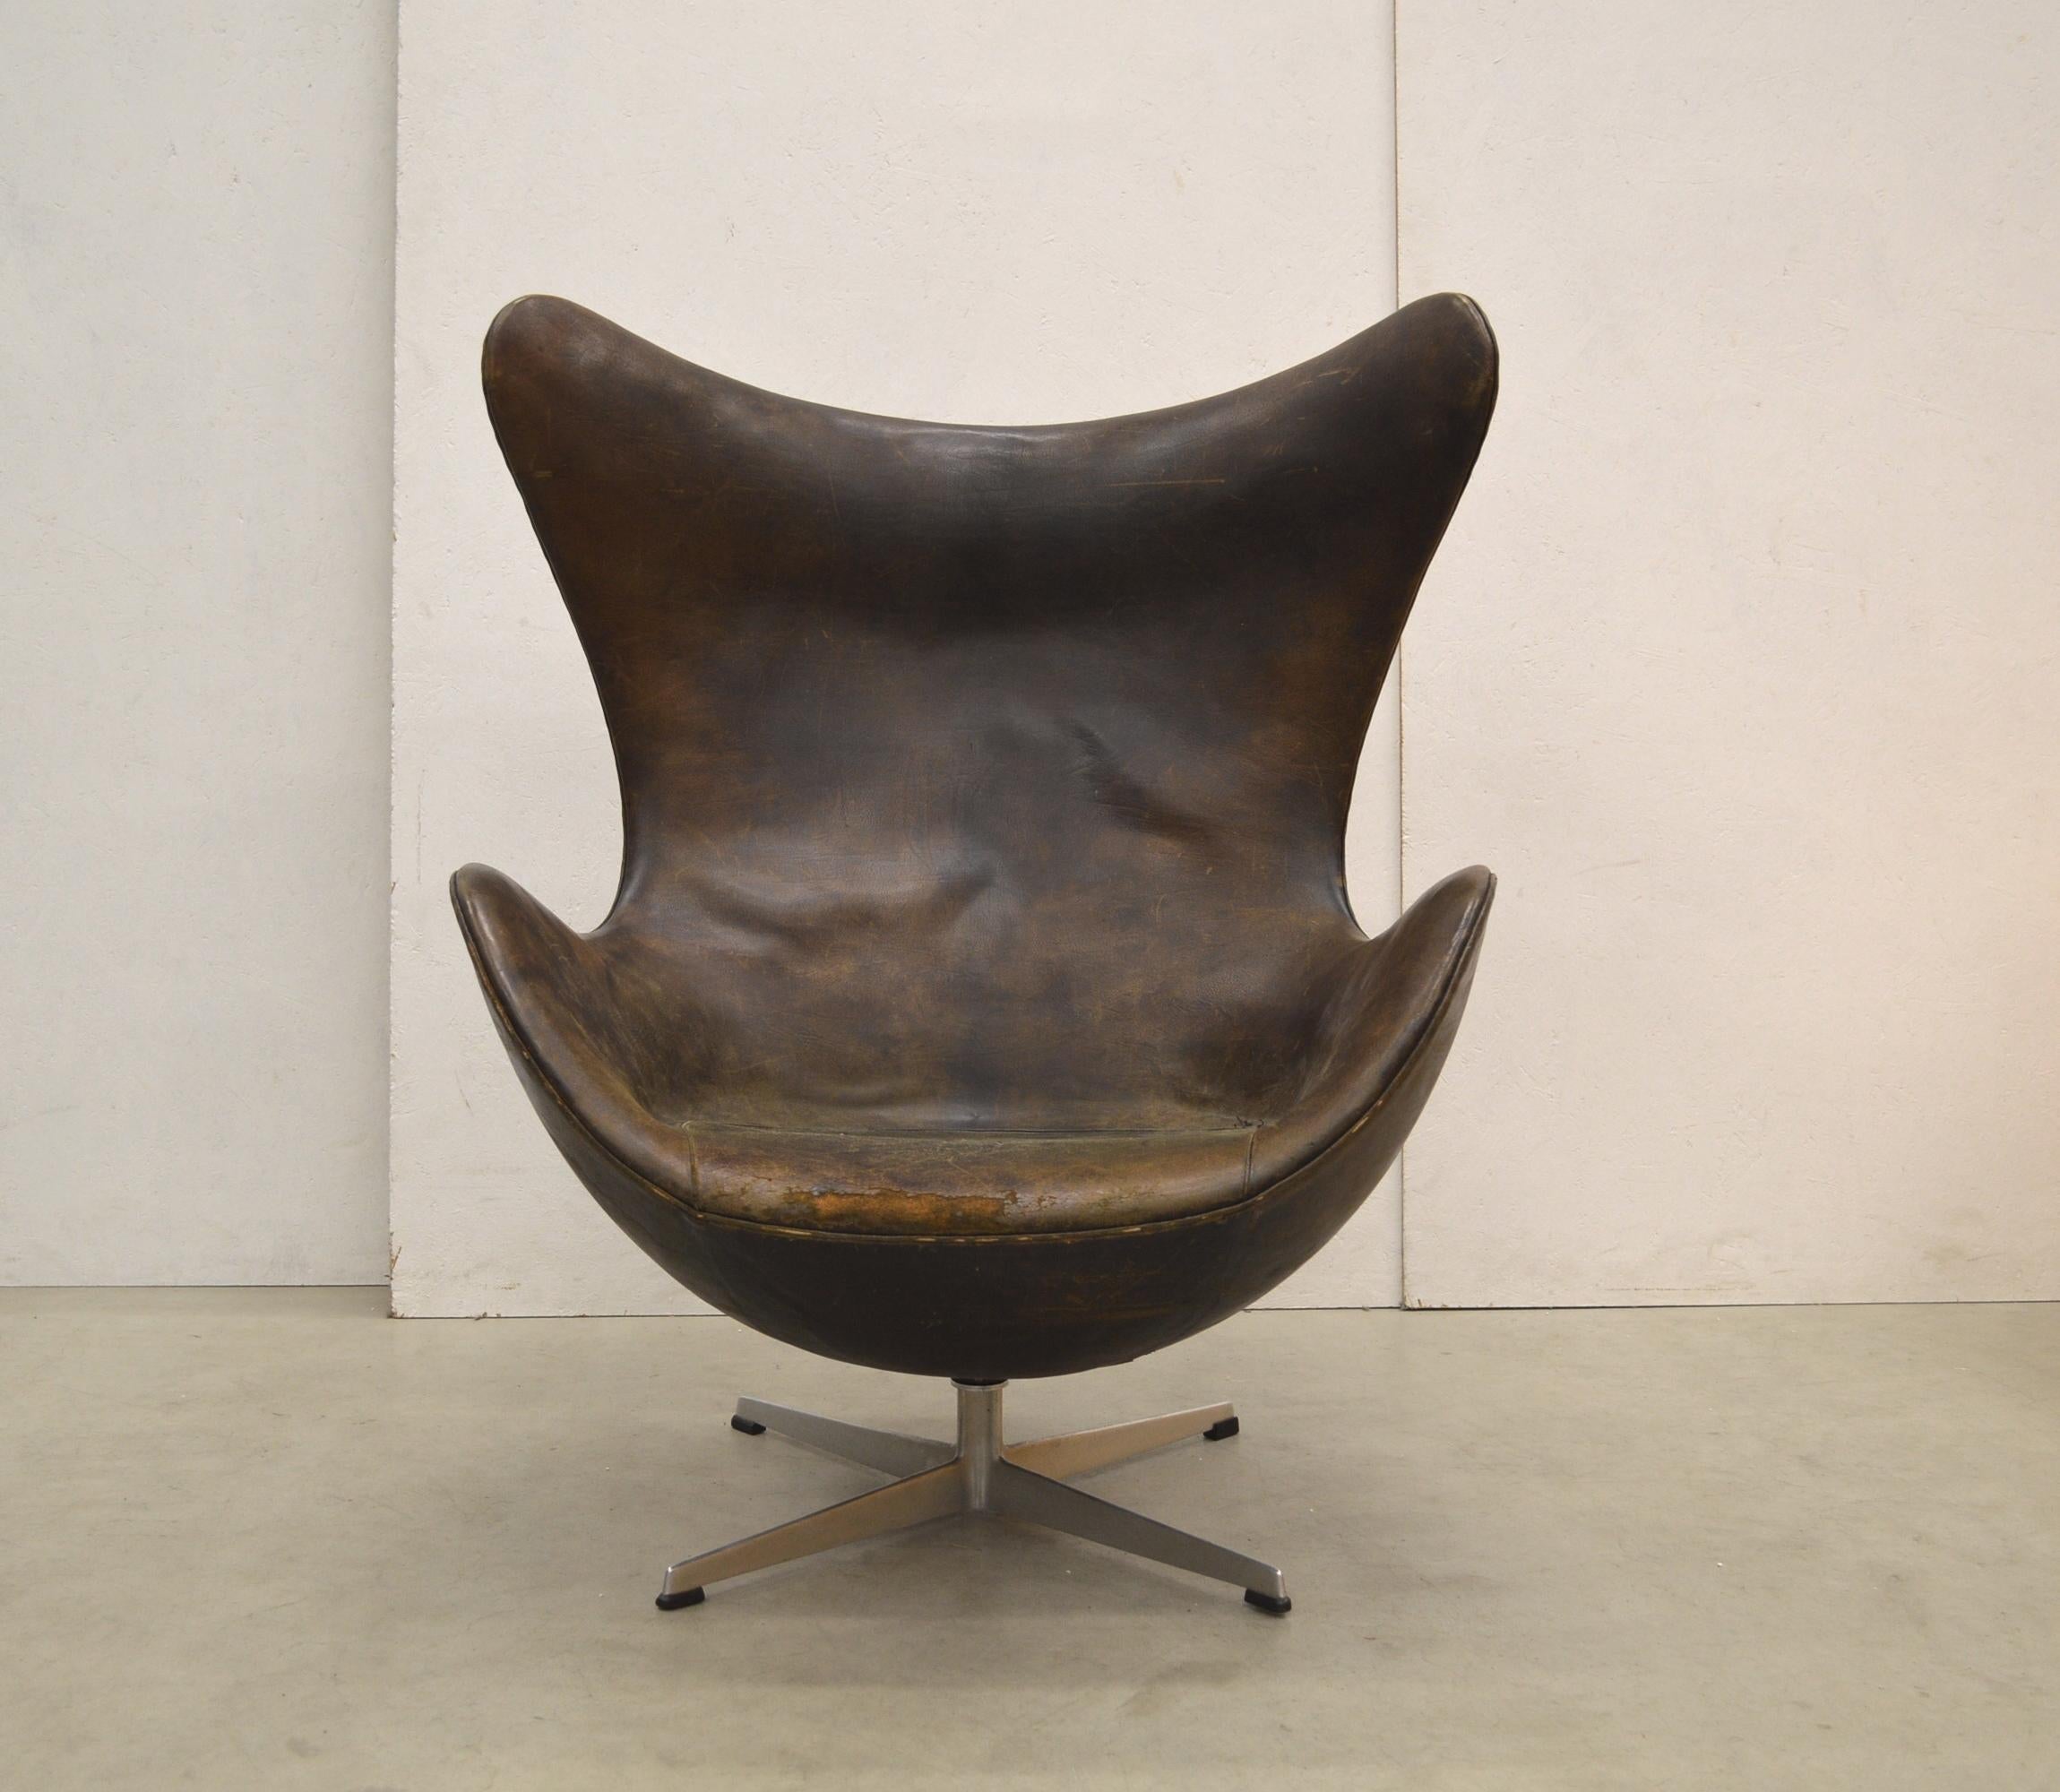 This very rare 1st edition egg chair was designed in the 50s by Arne Jacobsen for the SAS Hotel in Copenhagen and produced by Fritz Hansen around 1958/1959. The chair features a wonderful brown black leather upholstery which shows an amazing patina.